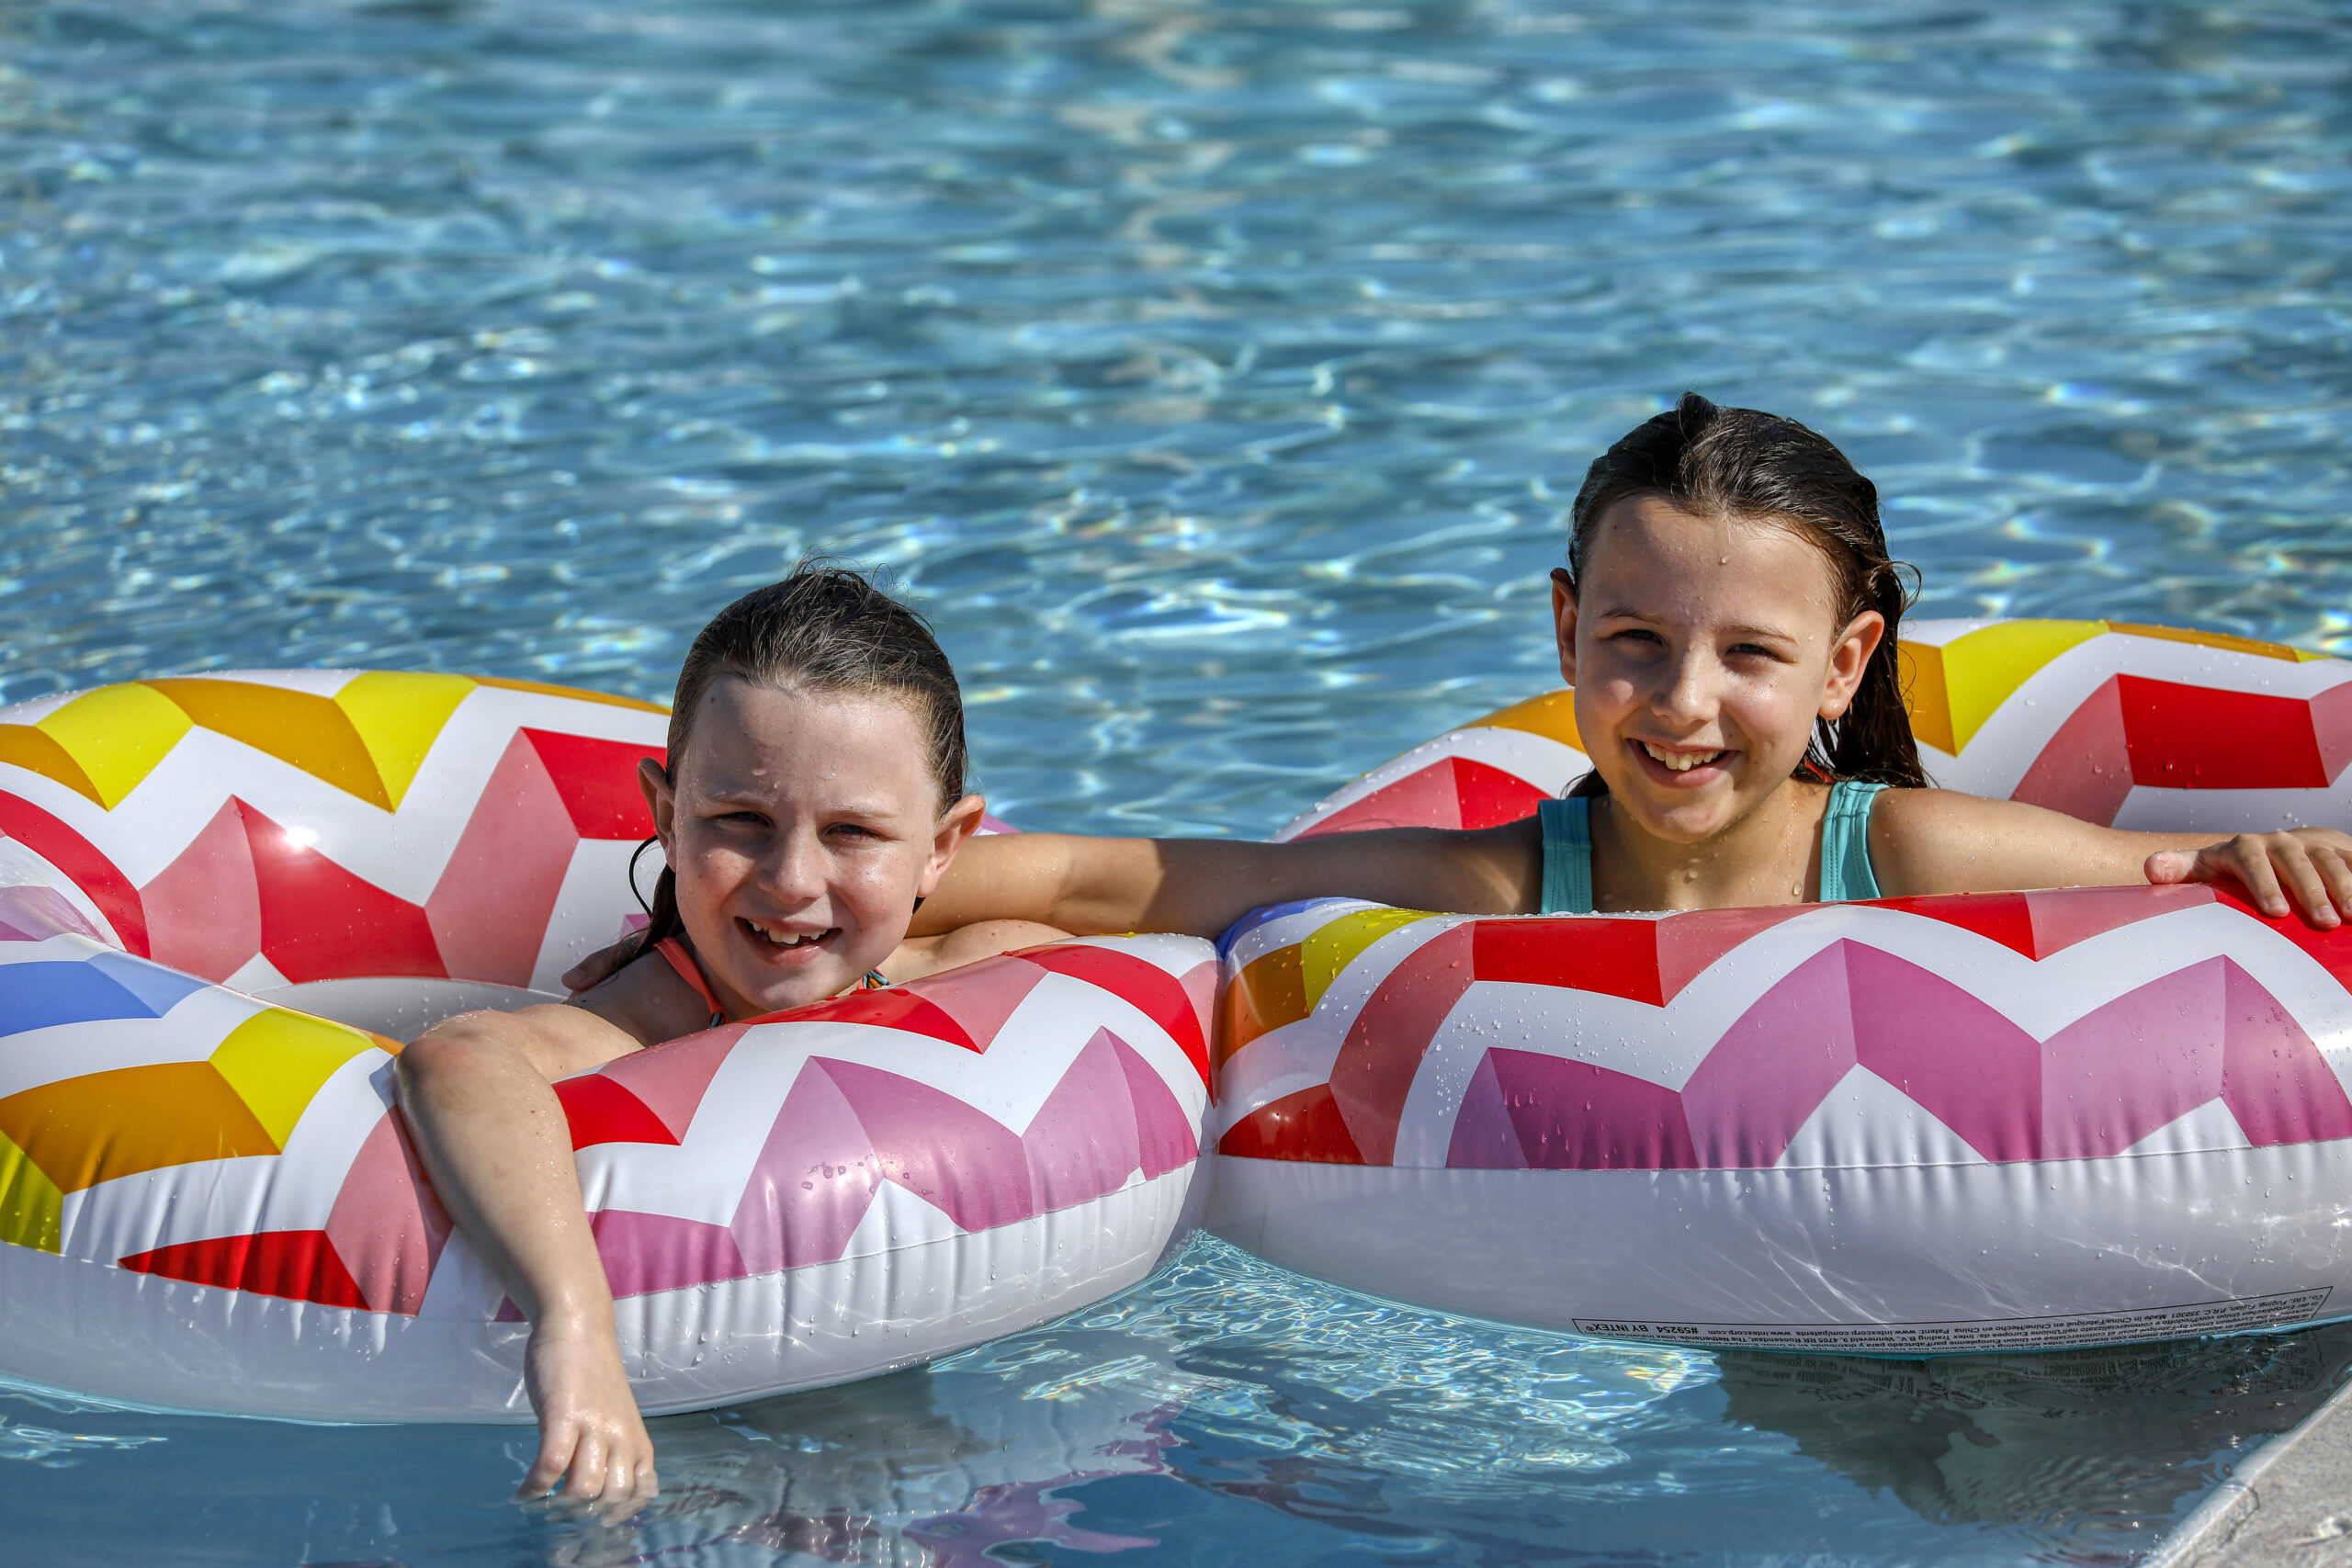 Two young girls are floating in a pool with inflatable tubes.